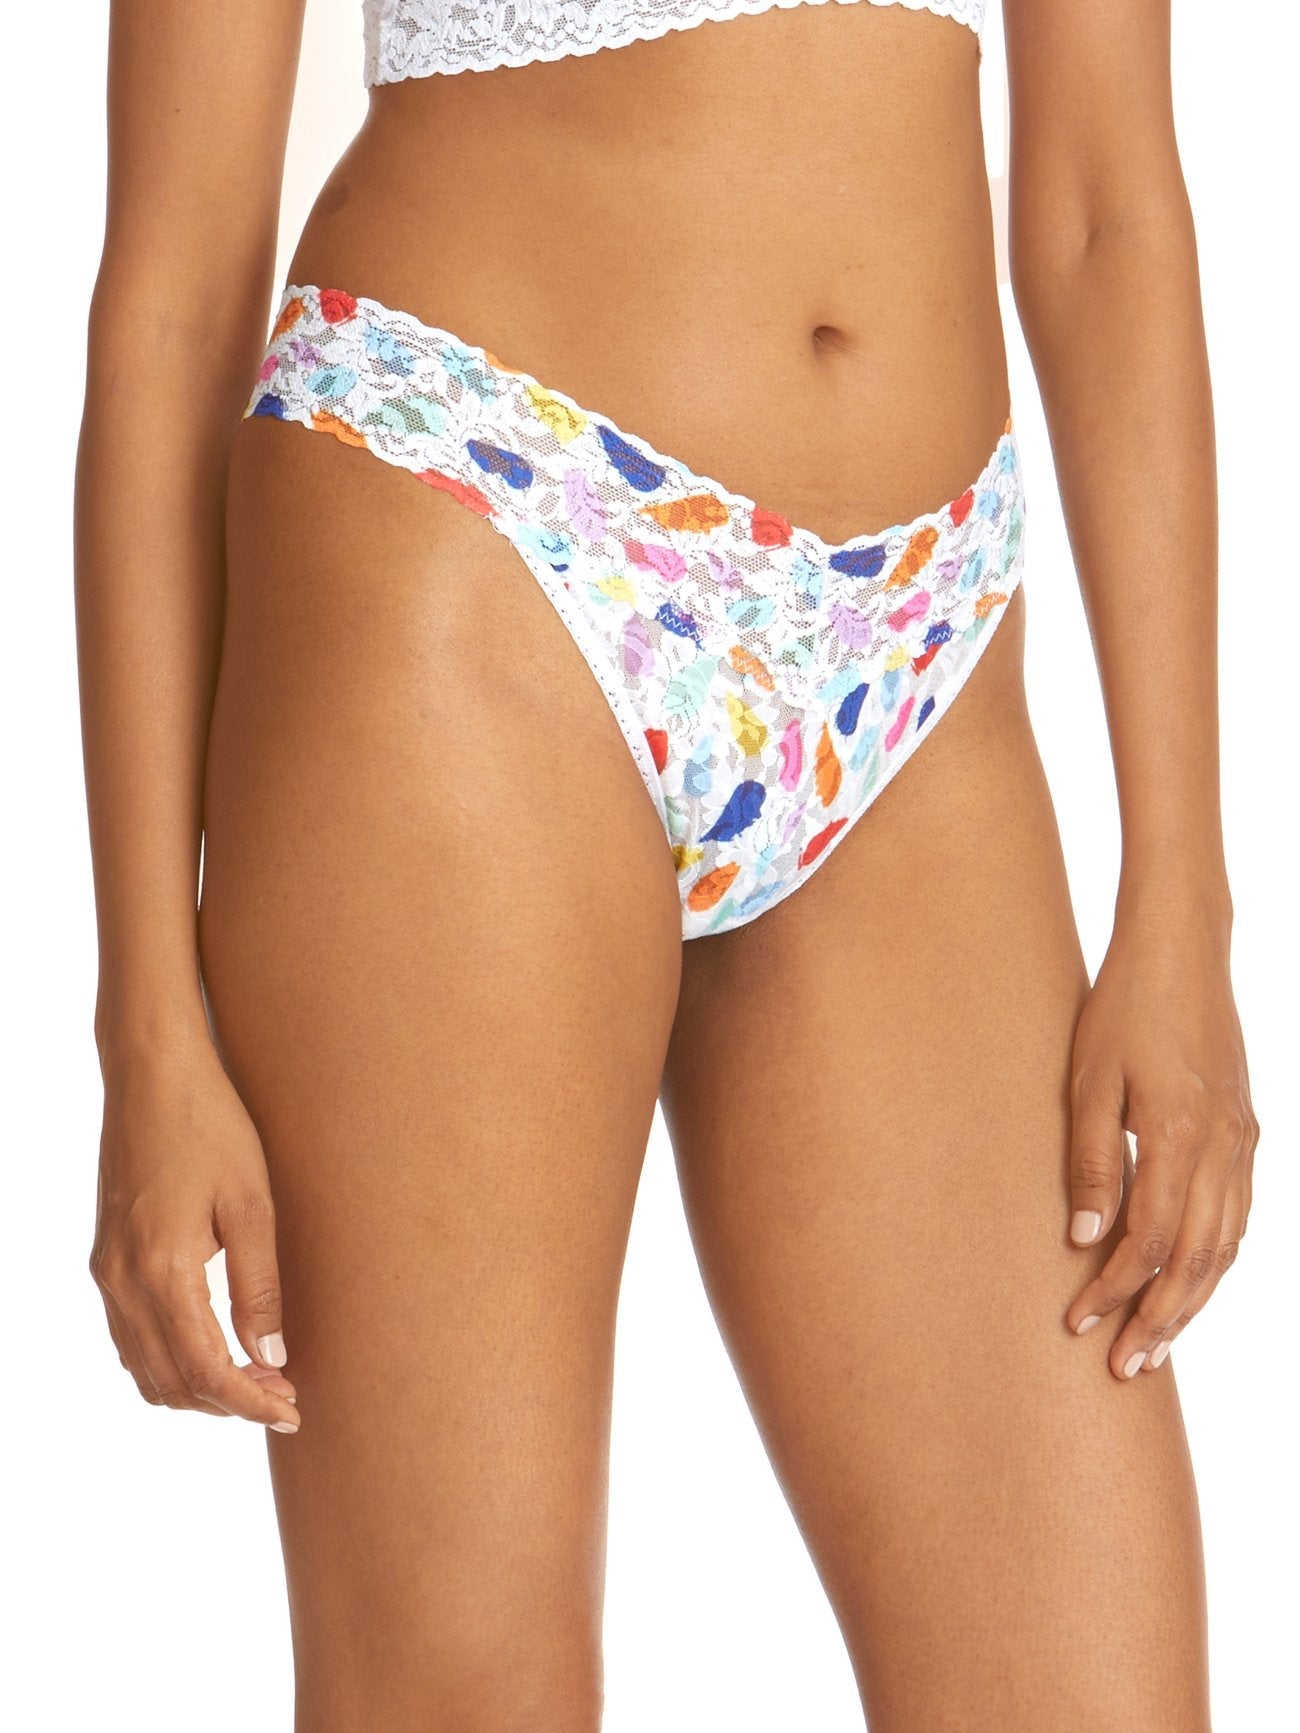 Hanky Panky Playful Expressions Thong - My Filosophy